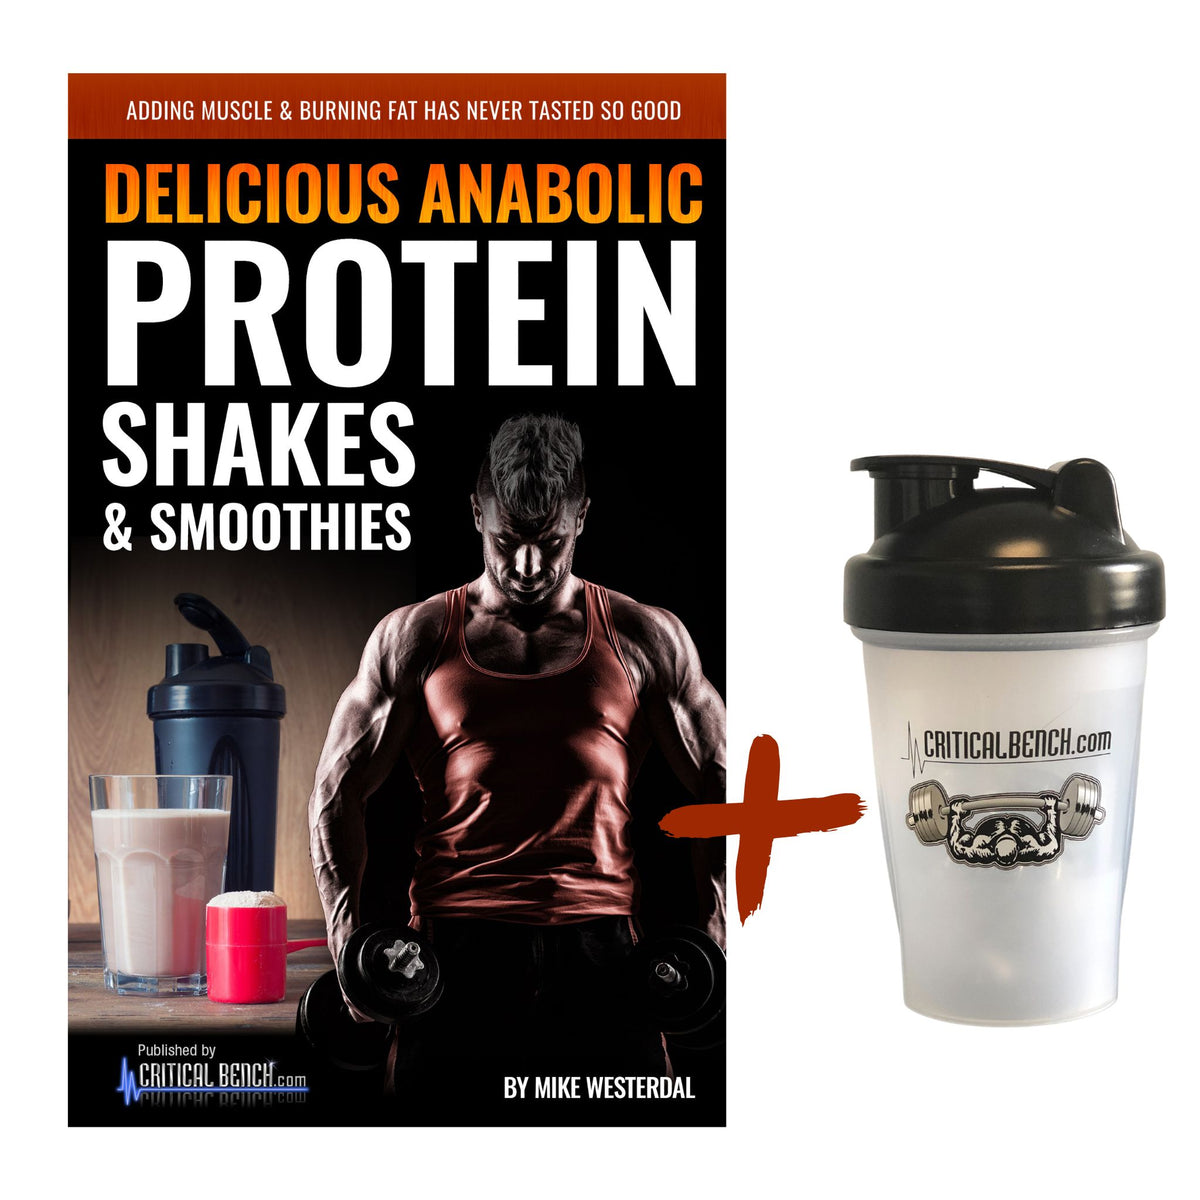 Delicious Anabolic Protein Shakes & Smoothies - Recipe Book & Shaker Cup